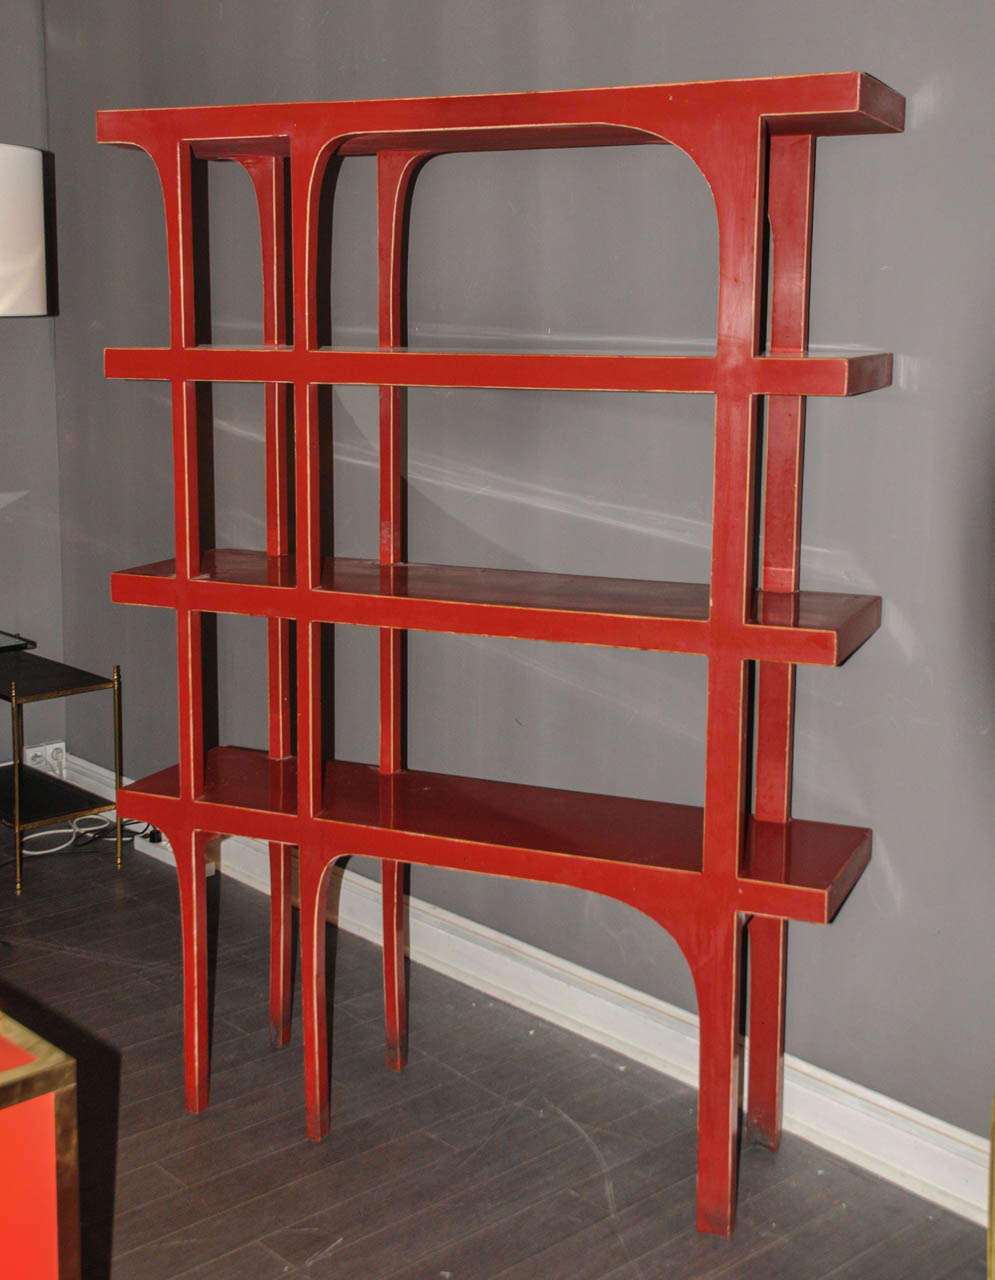 1970's bookshelves in red lacquered wood. Some scratches and wear traces on the lacquer. Good condition. Normal wear consistent with age and use.